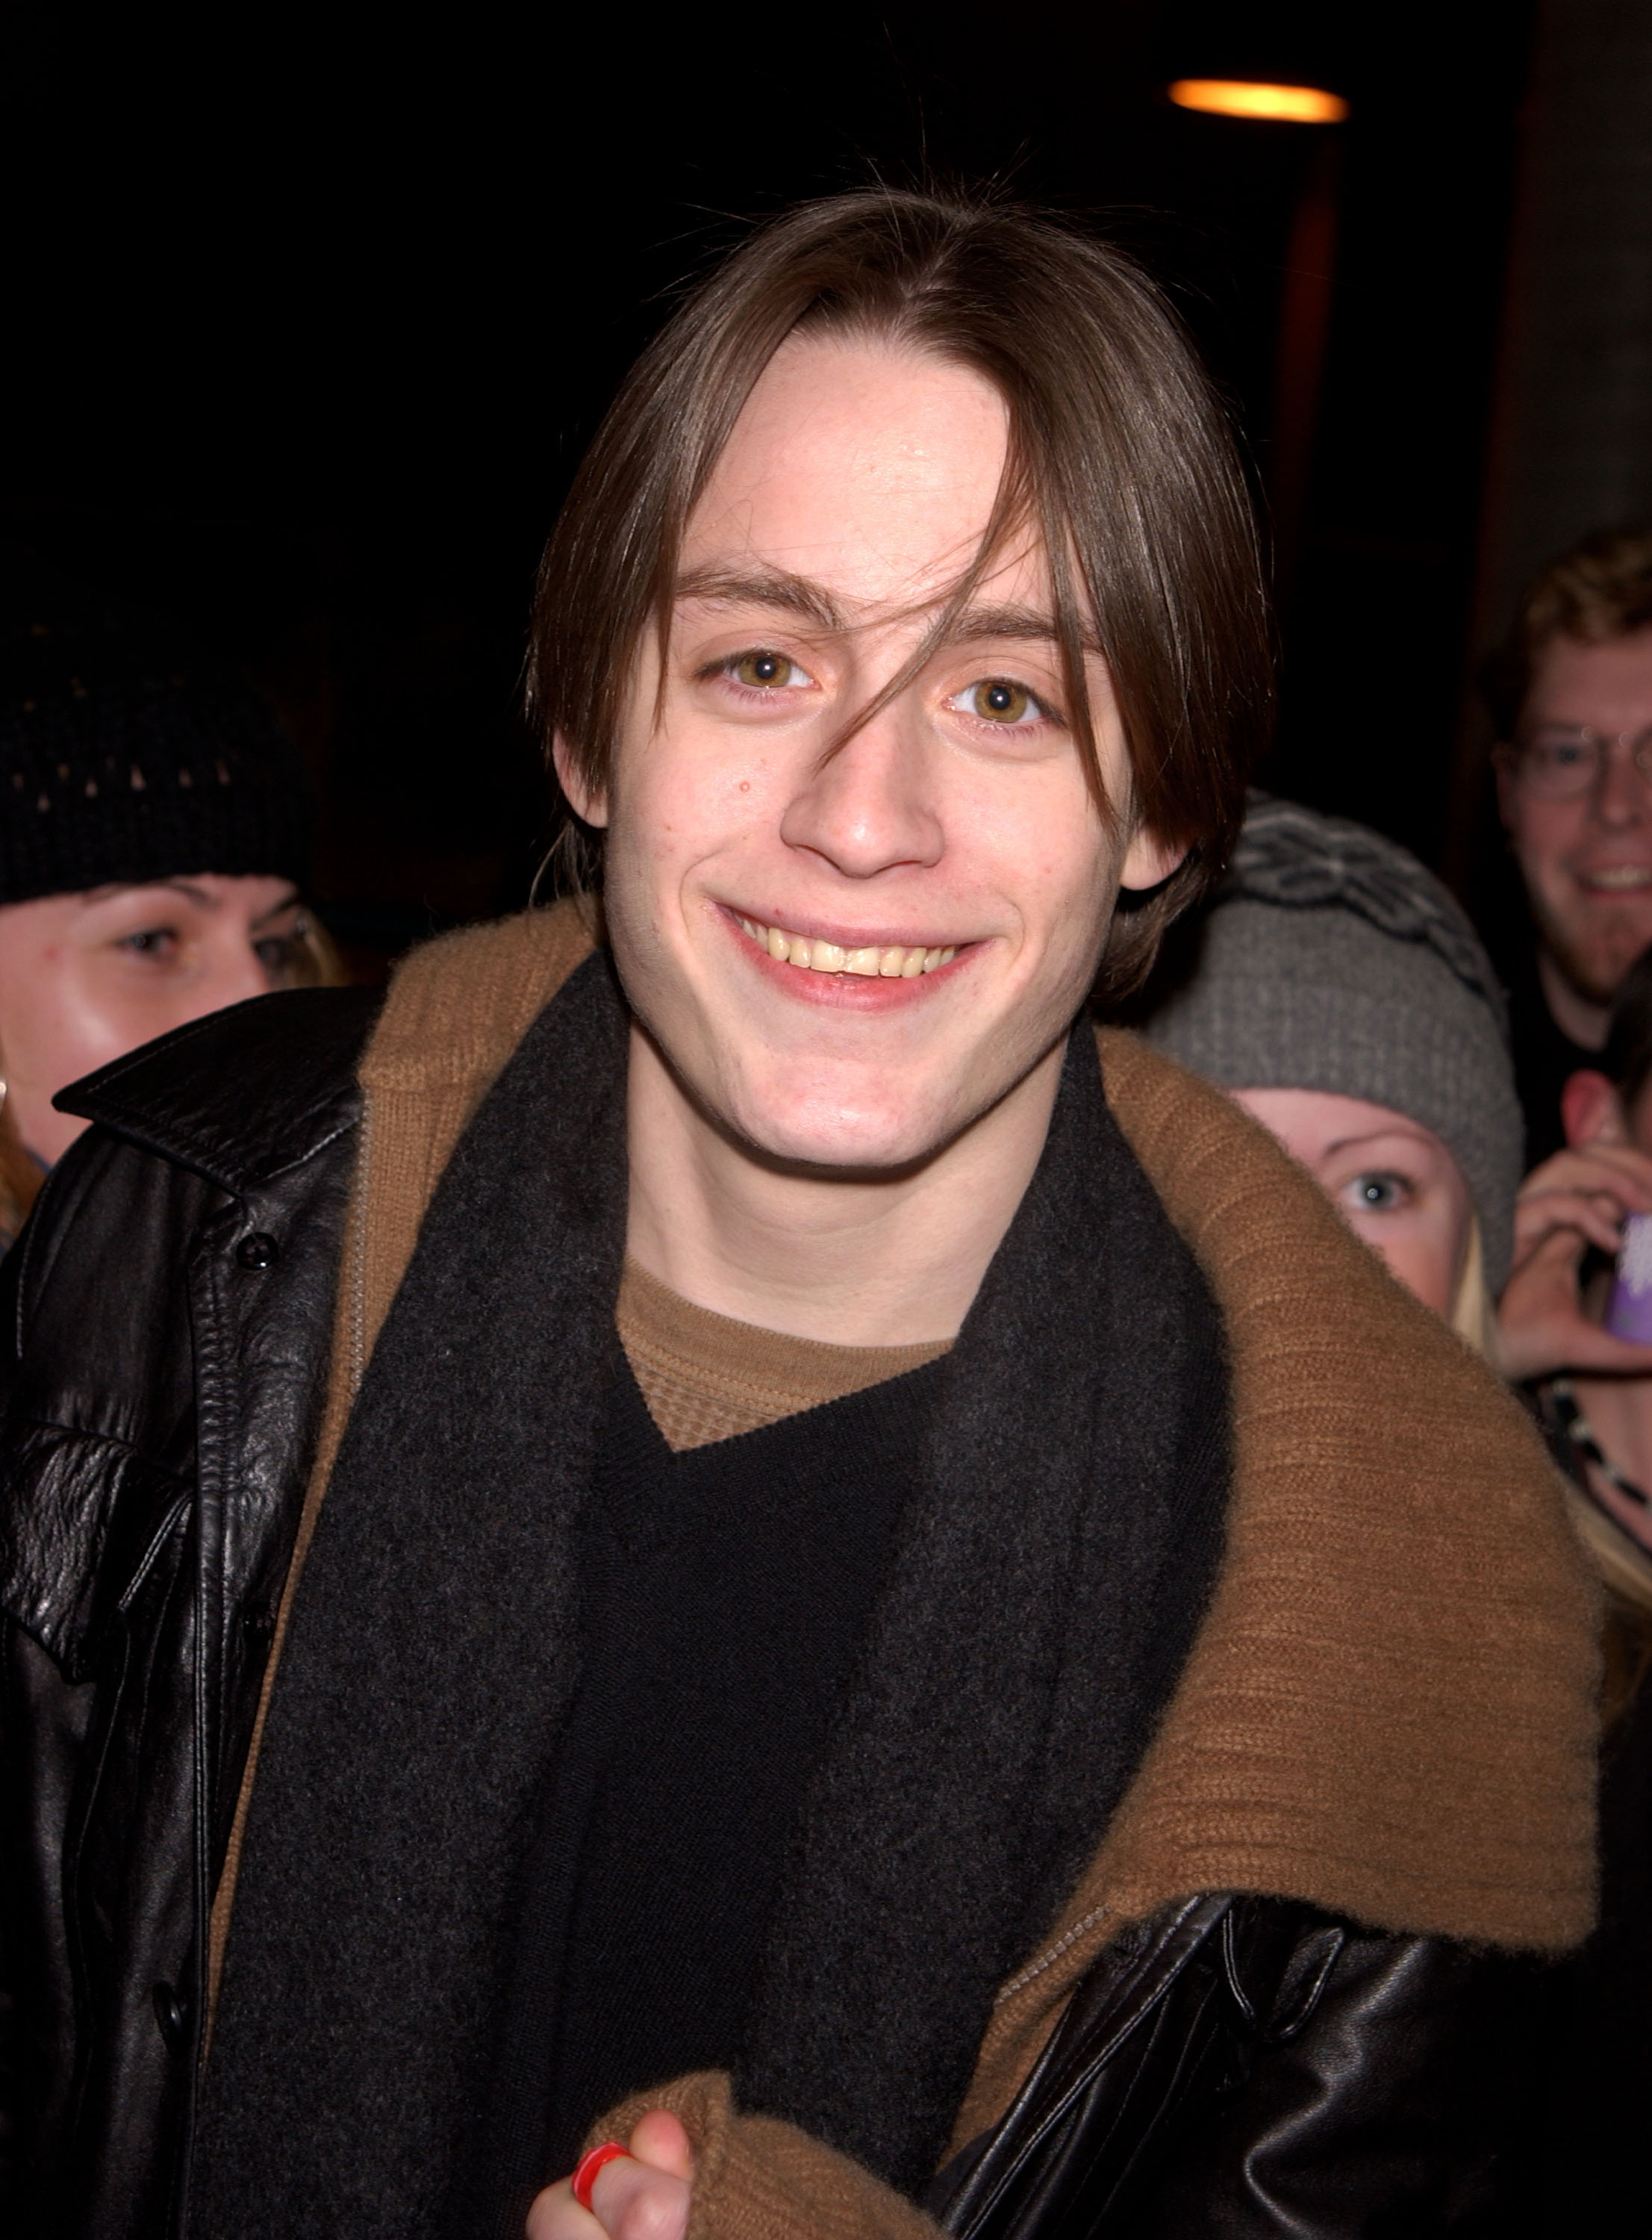 Kieran Culkin during the "Dangerous Lives Of Altar Boys" premiere in Park City, Utah in 2002 | Source: Getty Images